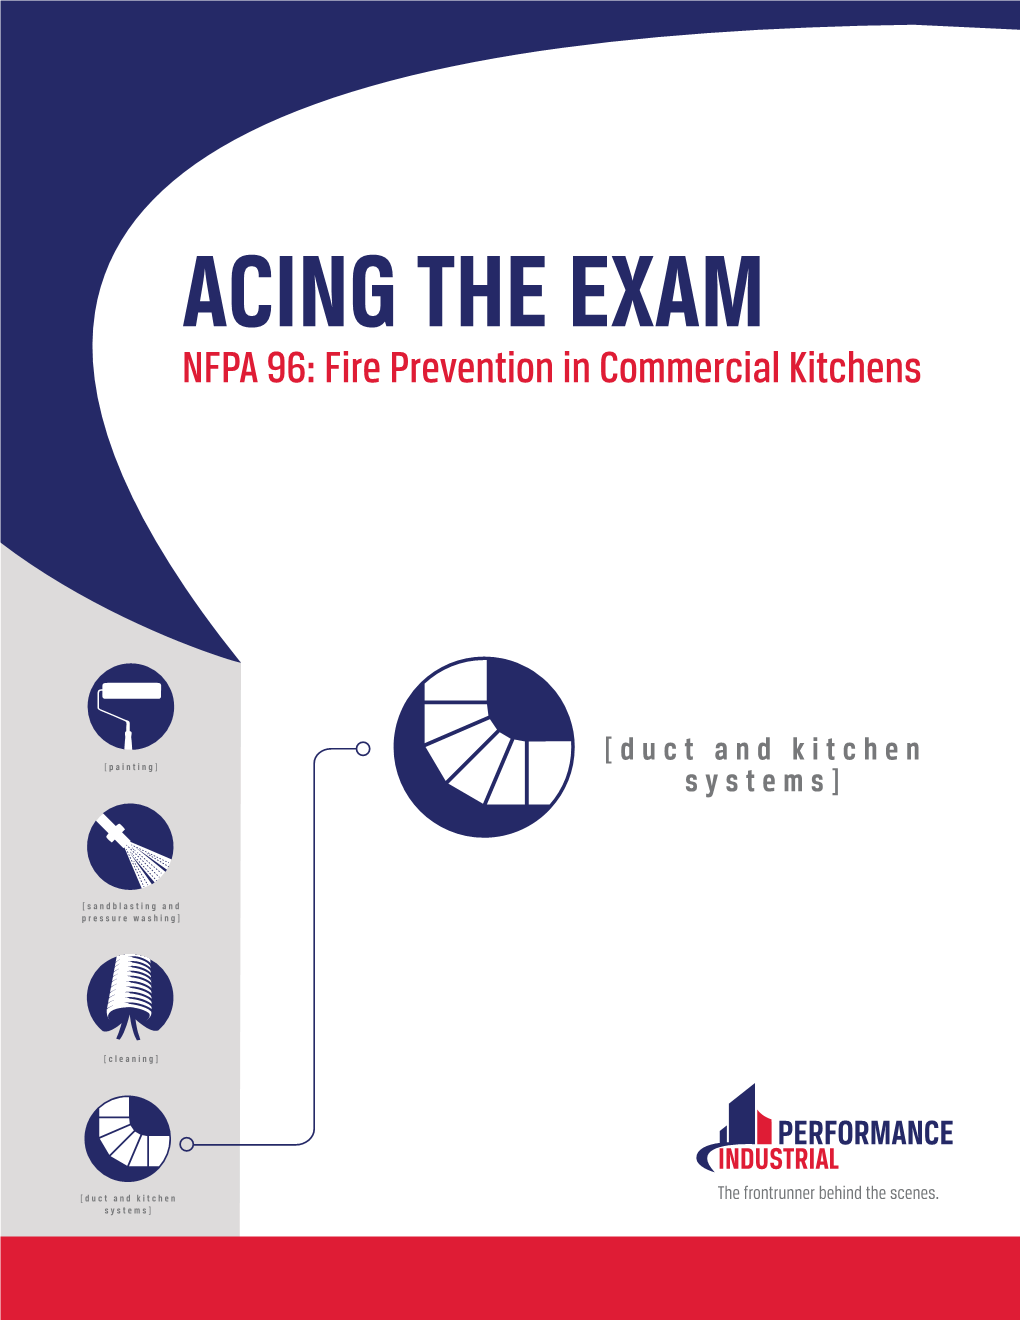 NFPA 96: Fire Prevention in Commercial Kitchens